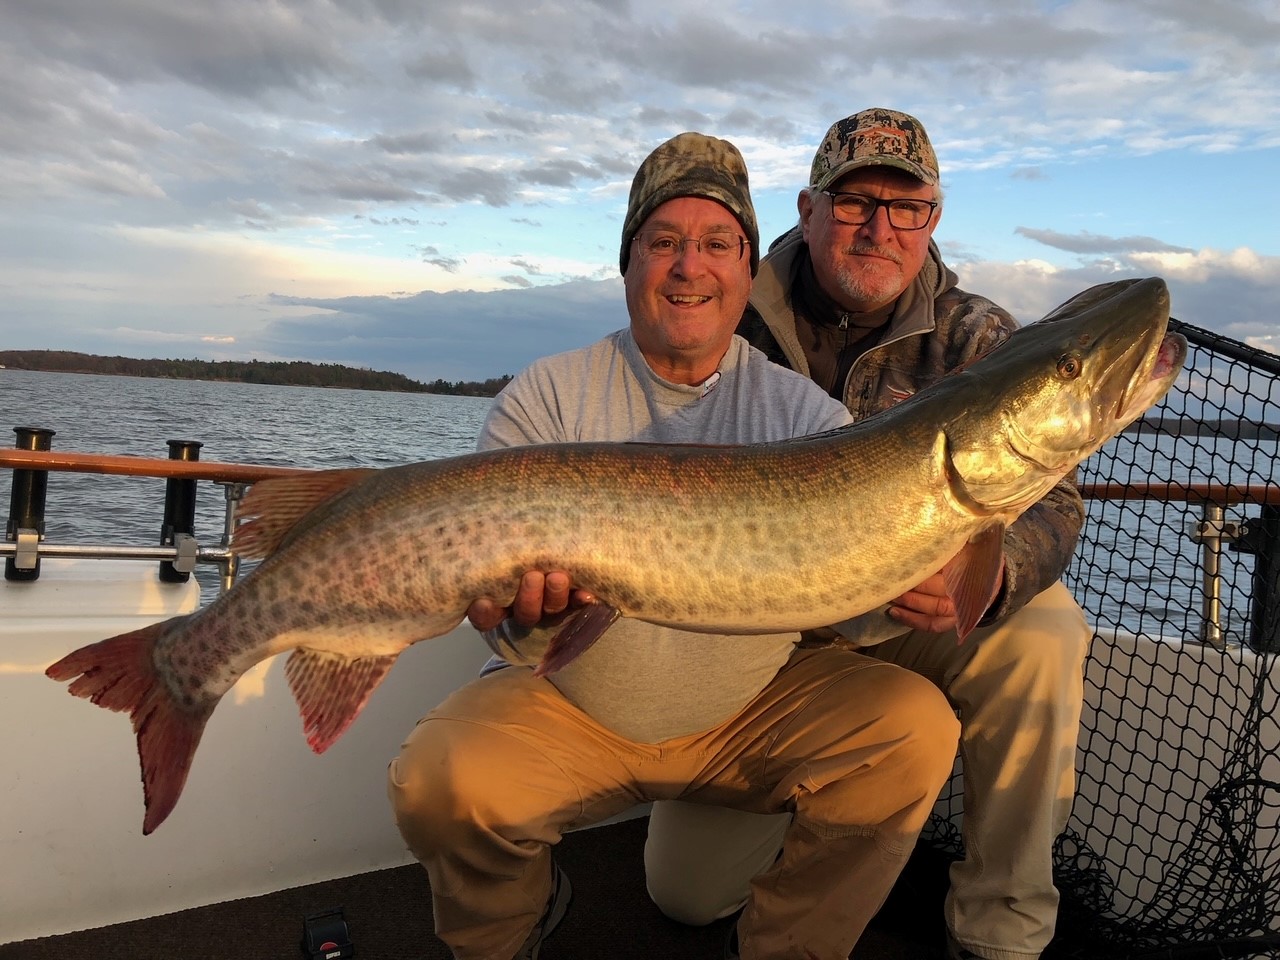 Andy Skop and a colleague holding an adult muskellunge